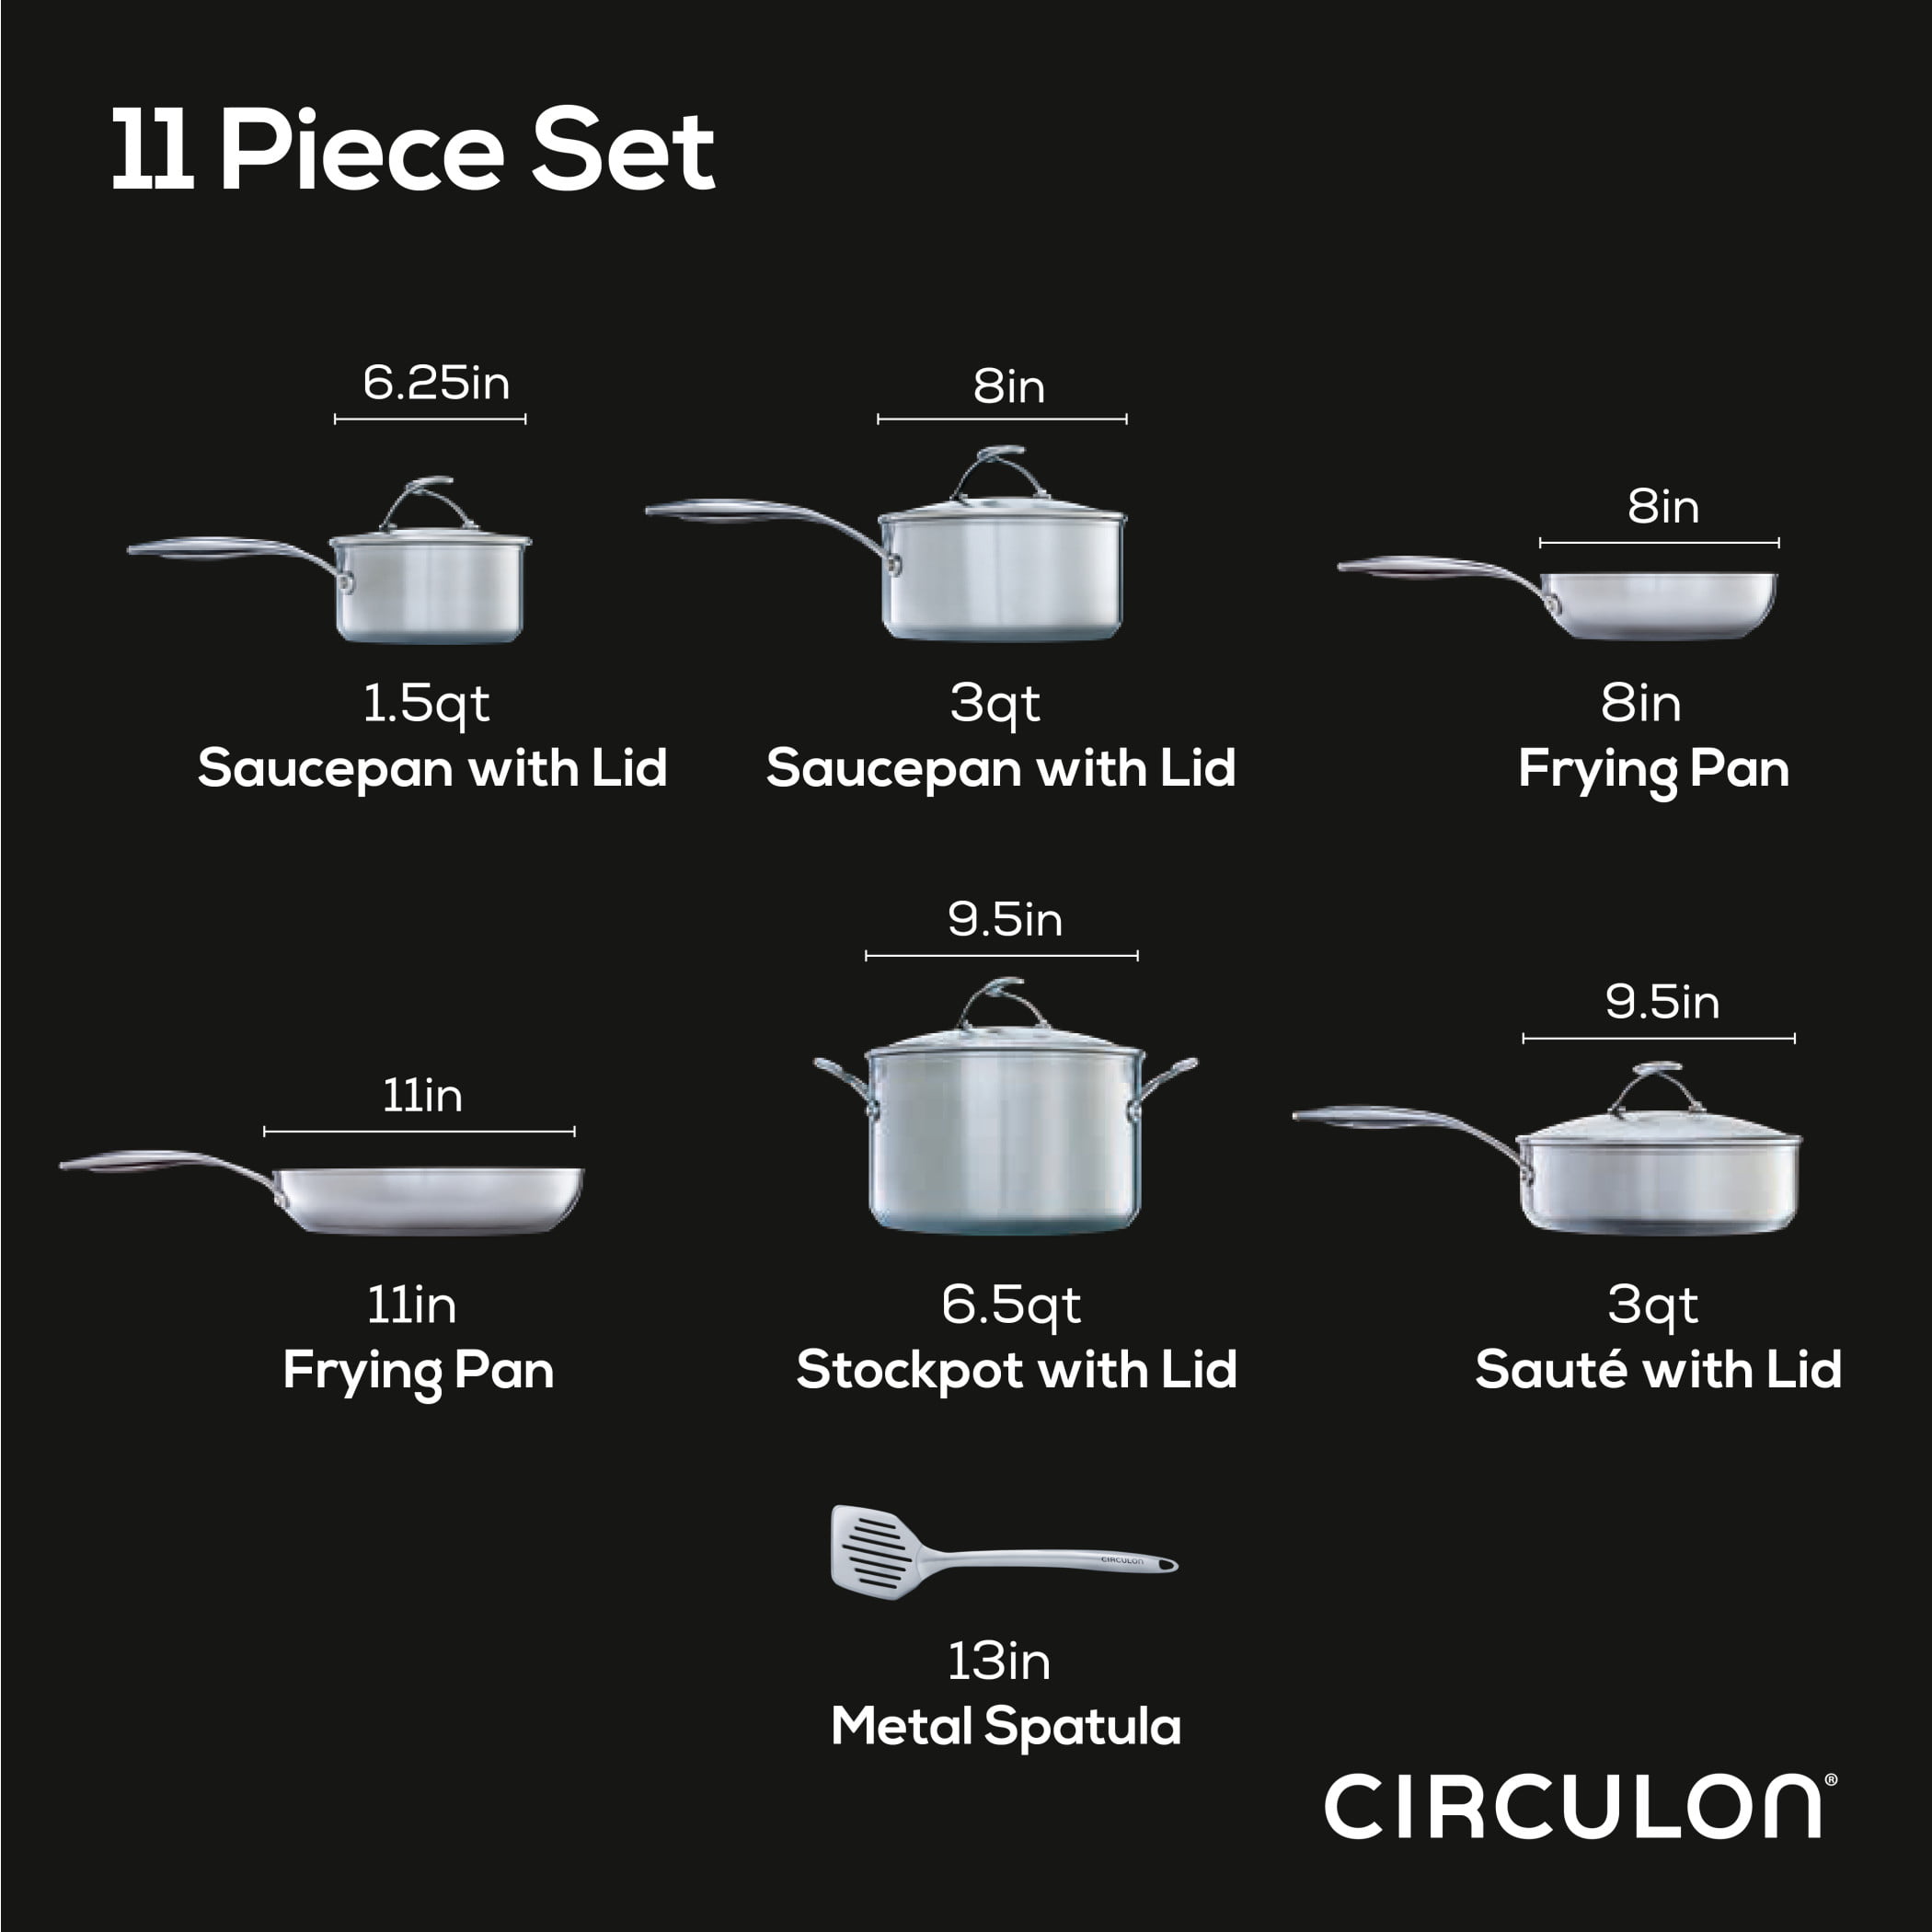 Circulon 11-Piece Stainless Steel Nonstick Cookware Set SteelShield Clad in Silver #30054